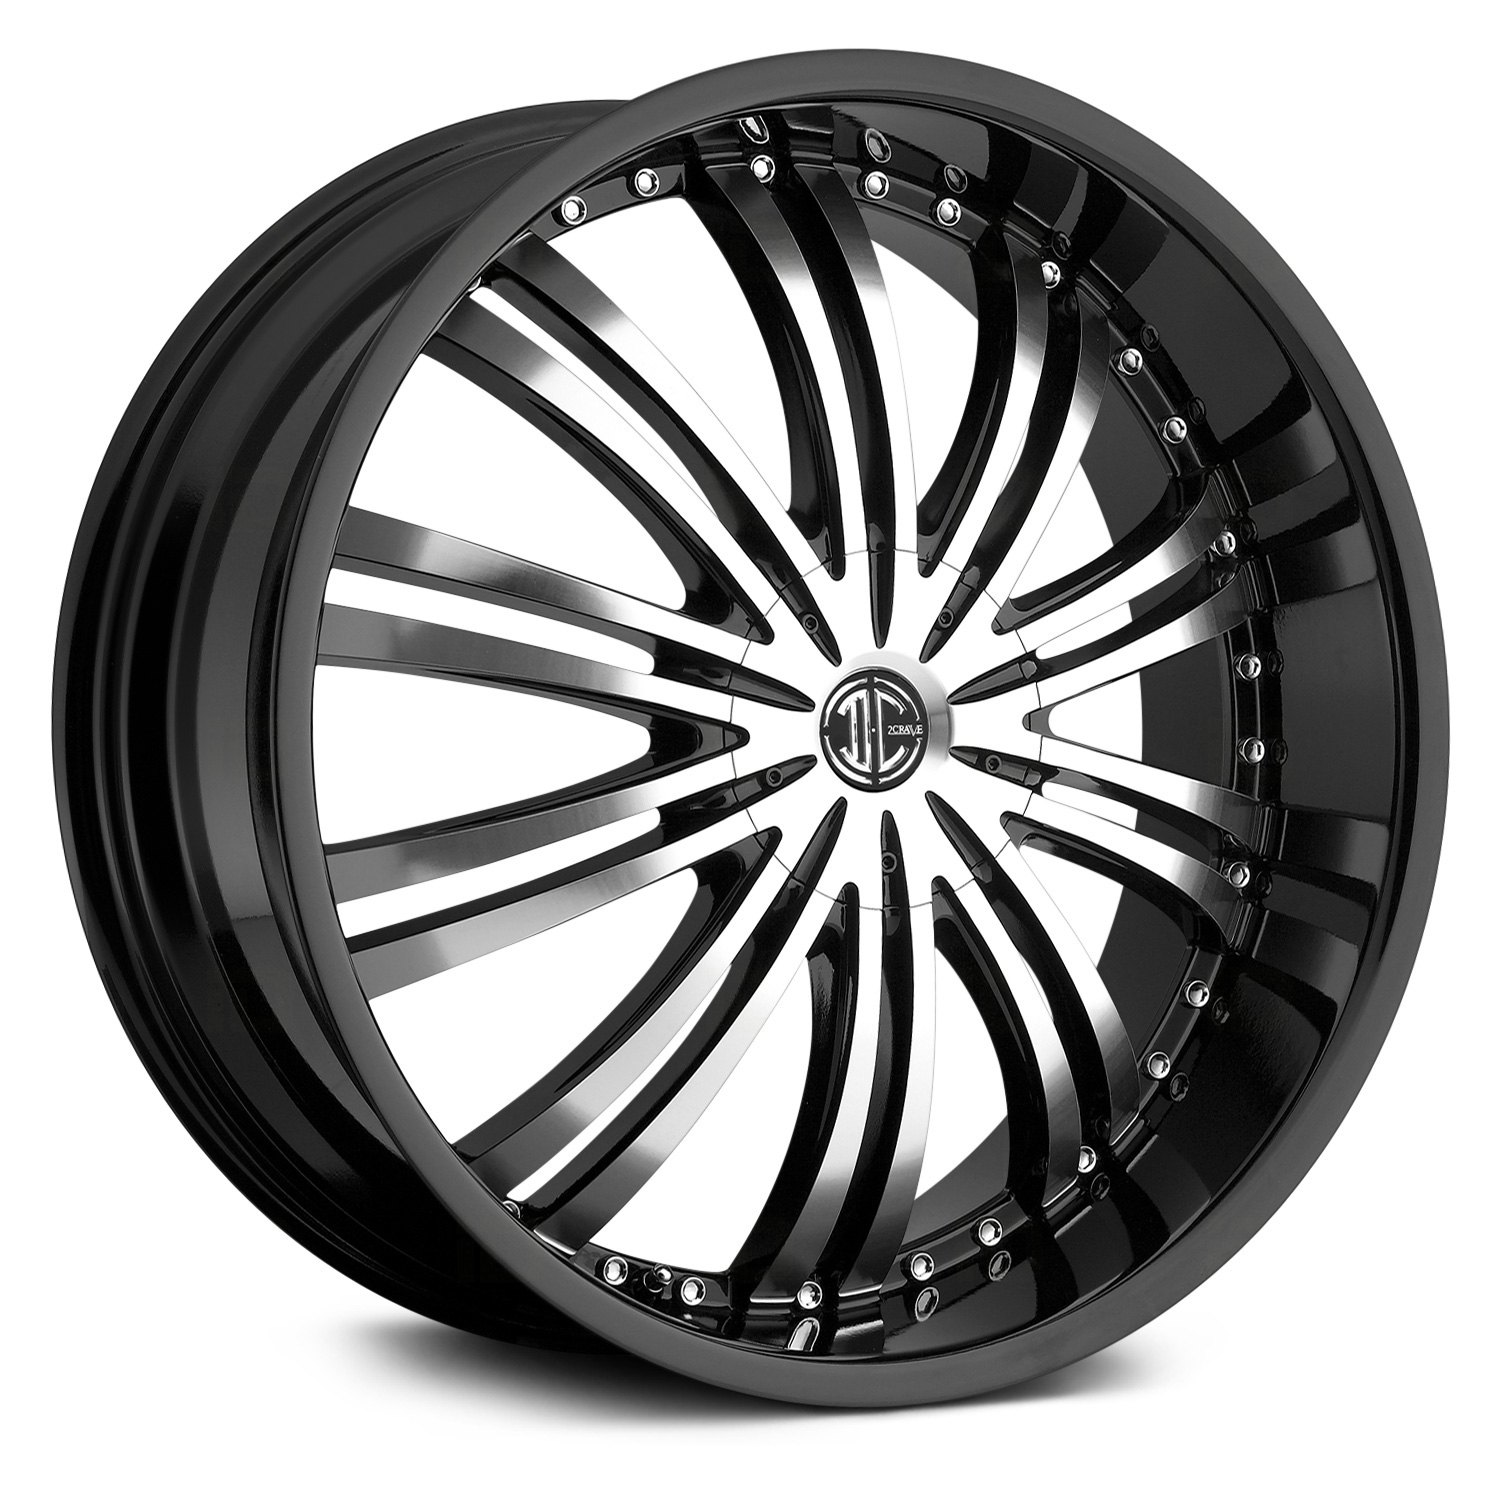 2 CRAVE® No.1 Wheels Gloss Black with Machined Face Rims